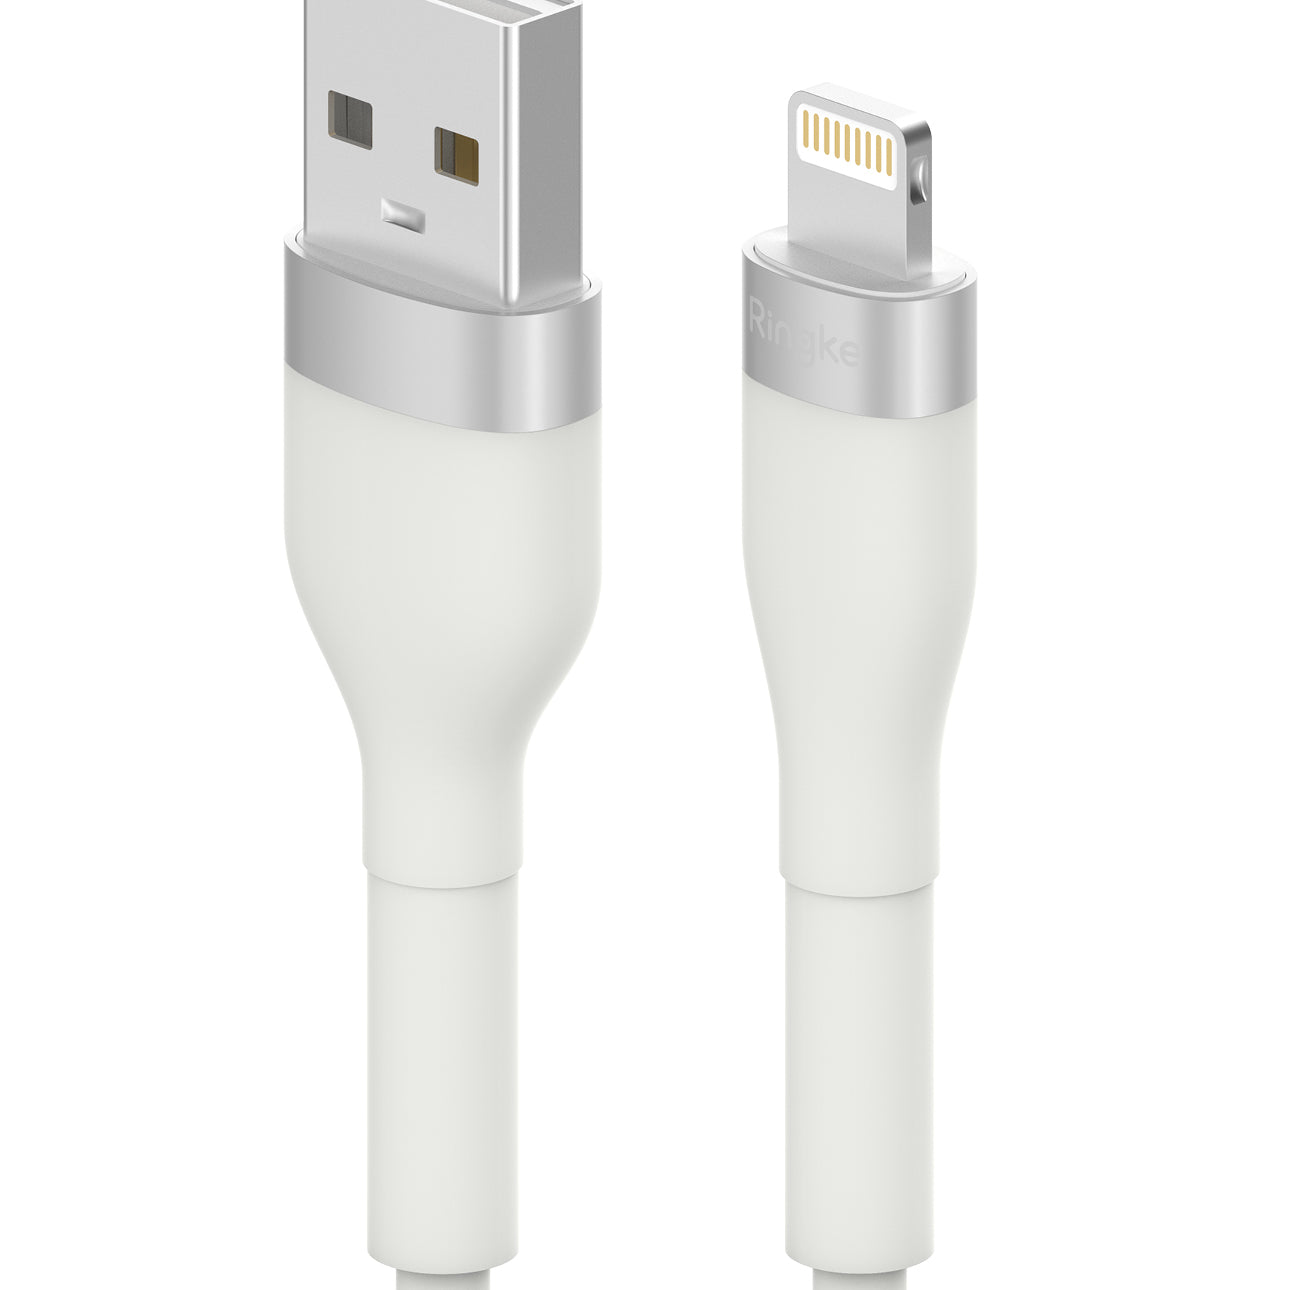 Ringke Fast Charging Pastel Cable - A Type-Lightning